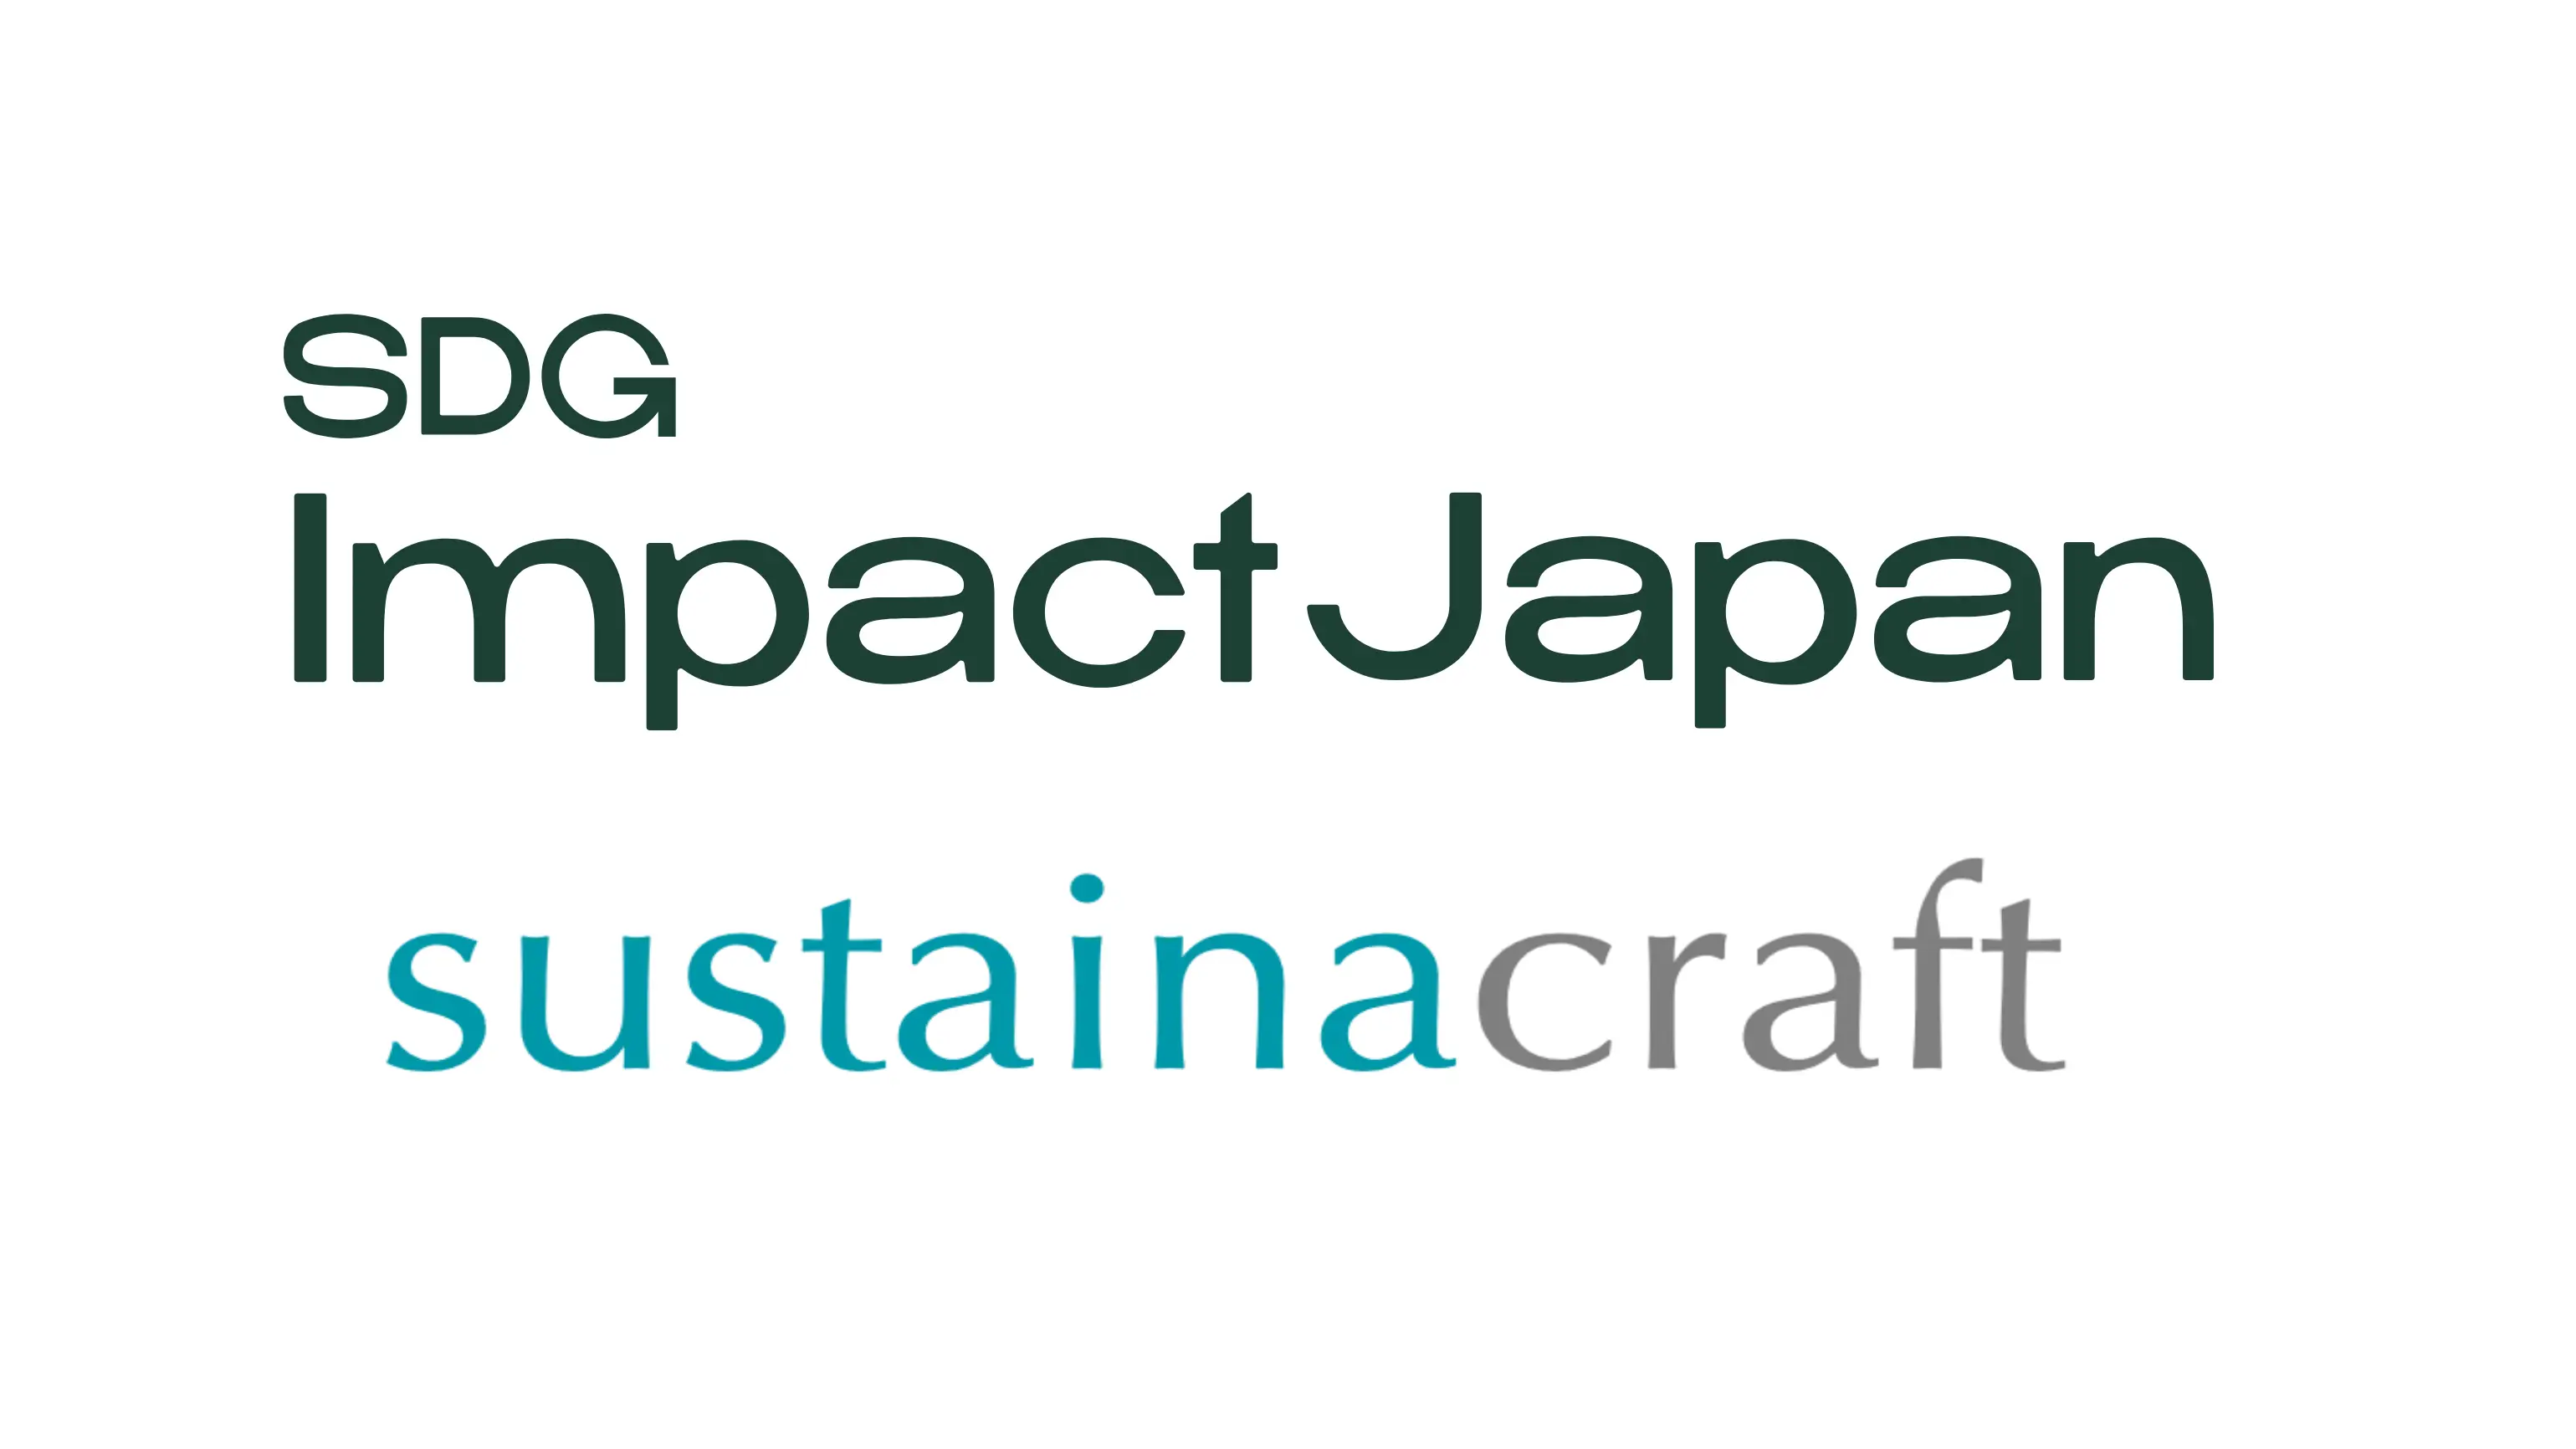 SDG Impact Japan and sustainacraft partner to establish Japan's first investment fund for high-quality nature-based carbon credits